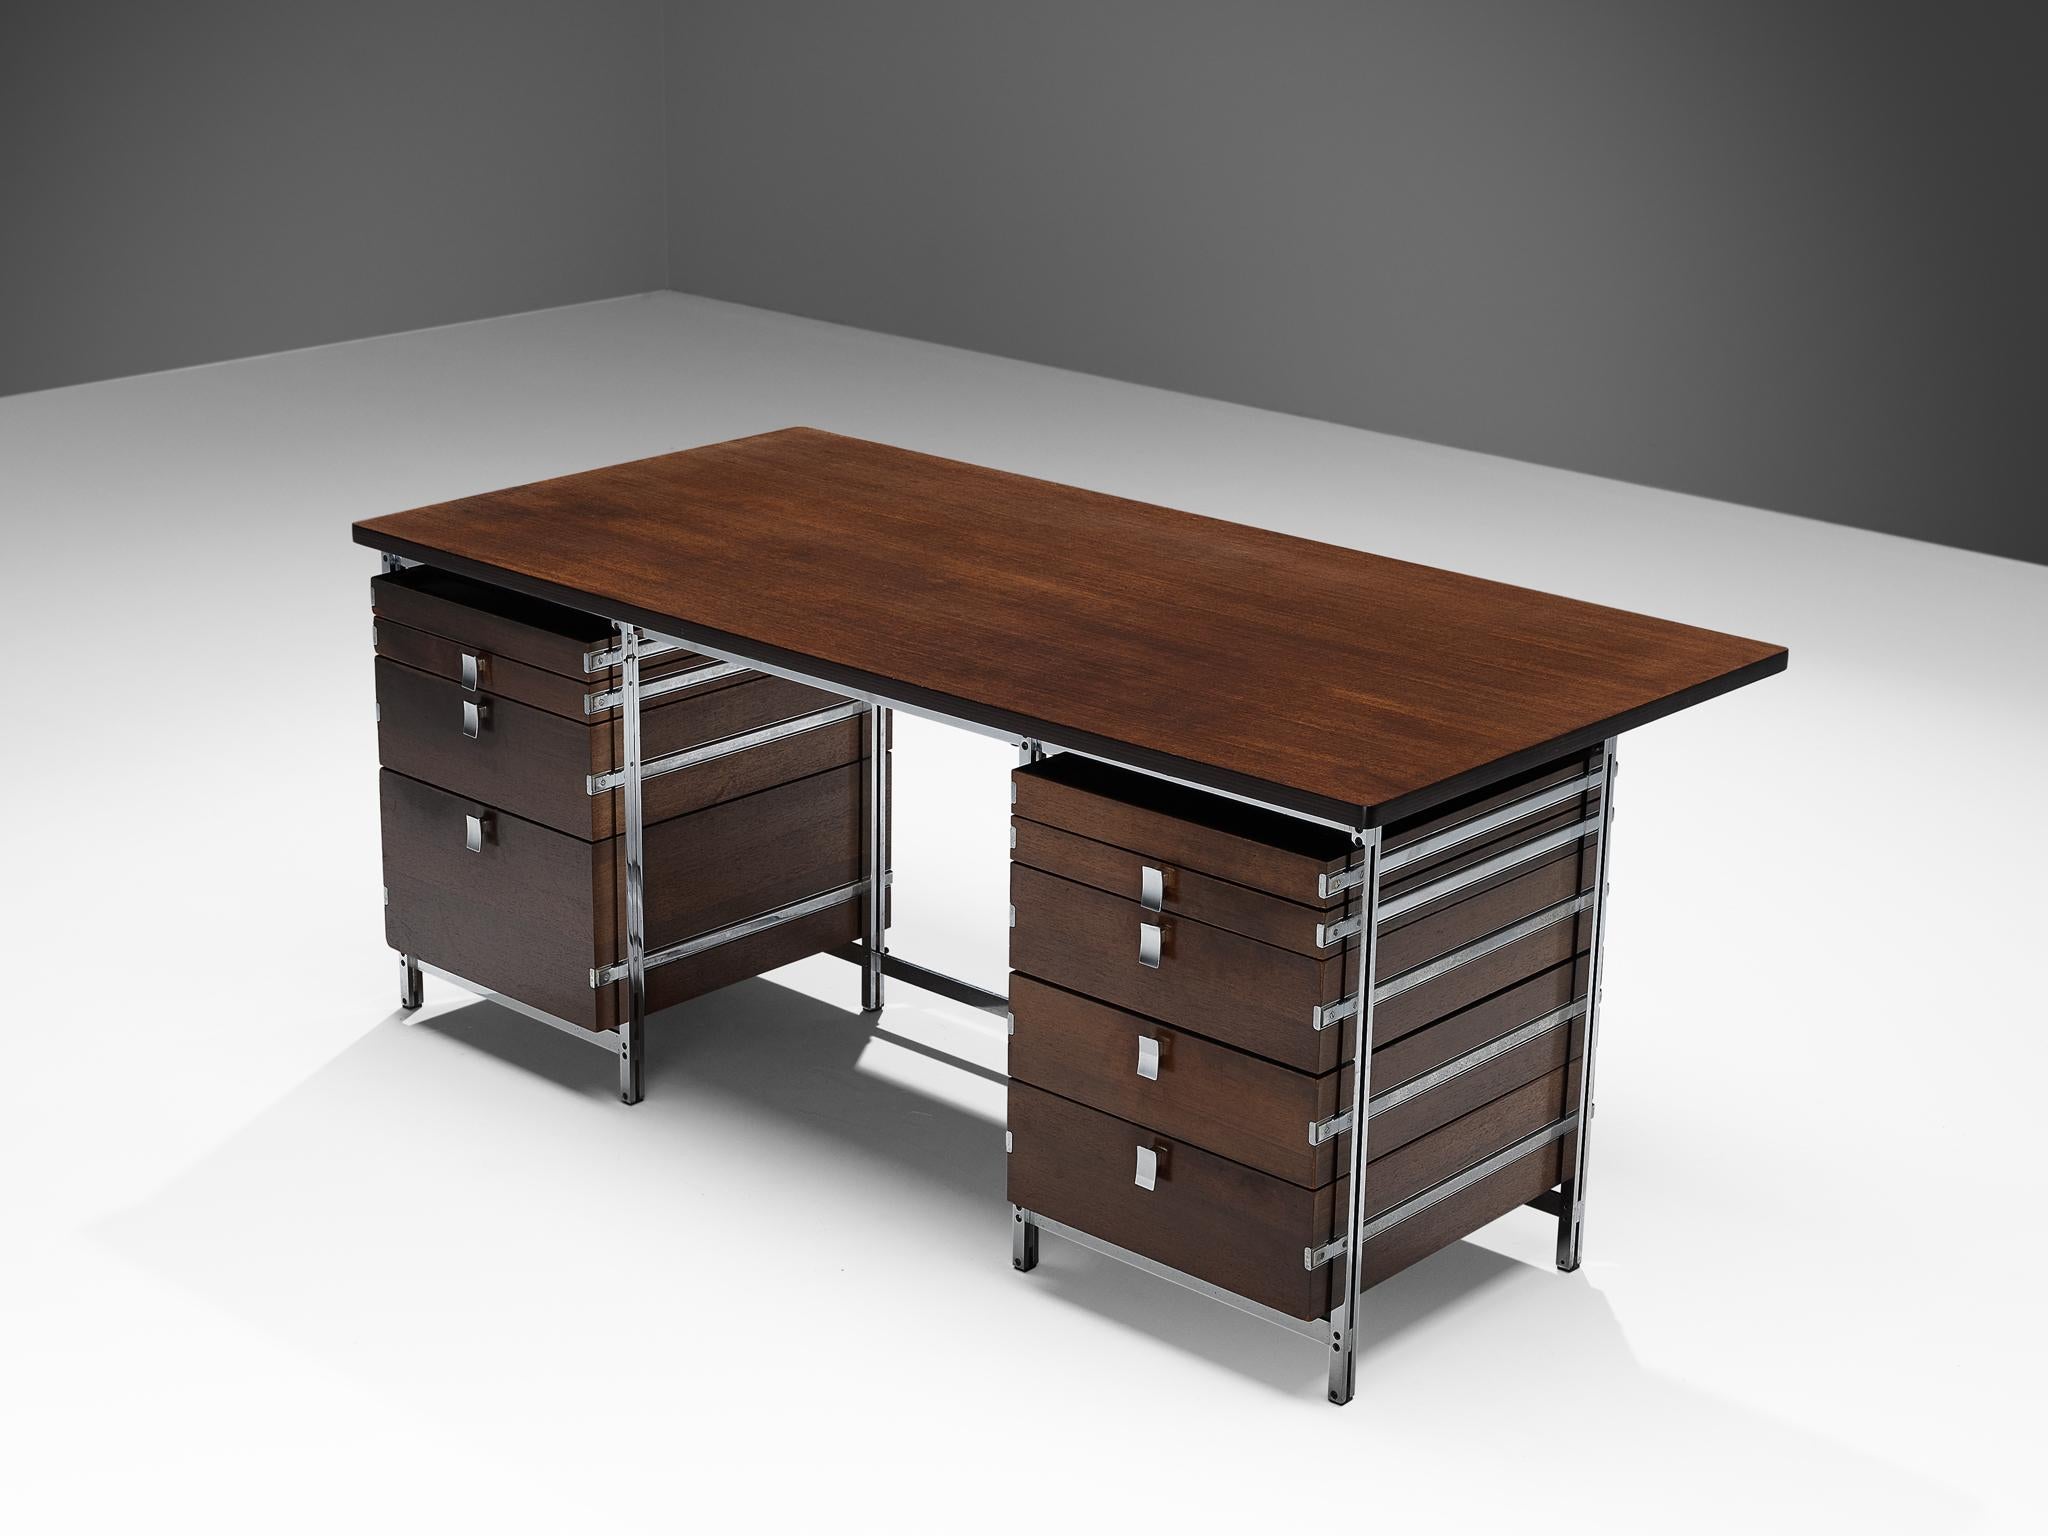 Jules Wabbes for Mobilier Universel, executive desk, mutenyé, chromed steel, Belgium, 1960s

A superb example of an early executive desk in mutenyé from the 1960s designed by master designer Jules Wabbes for Mobilier Universel. A clearly